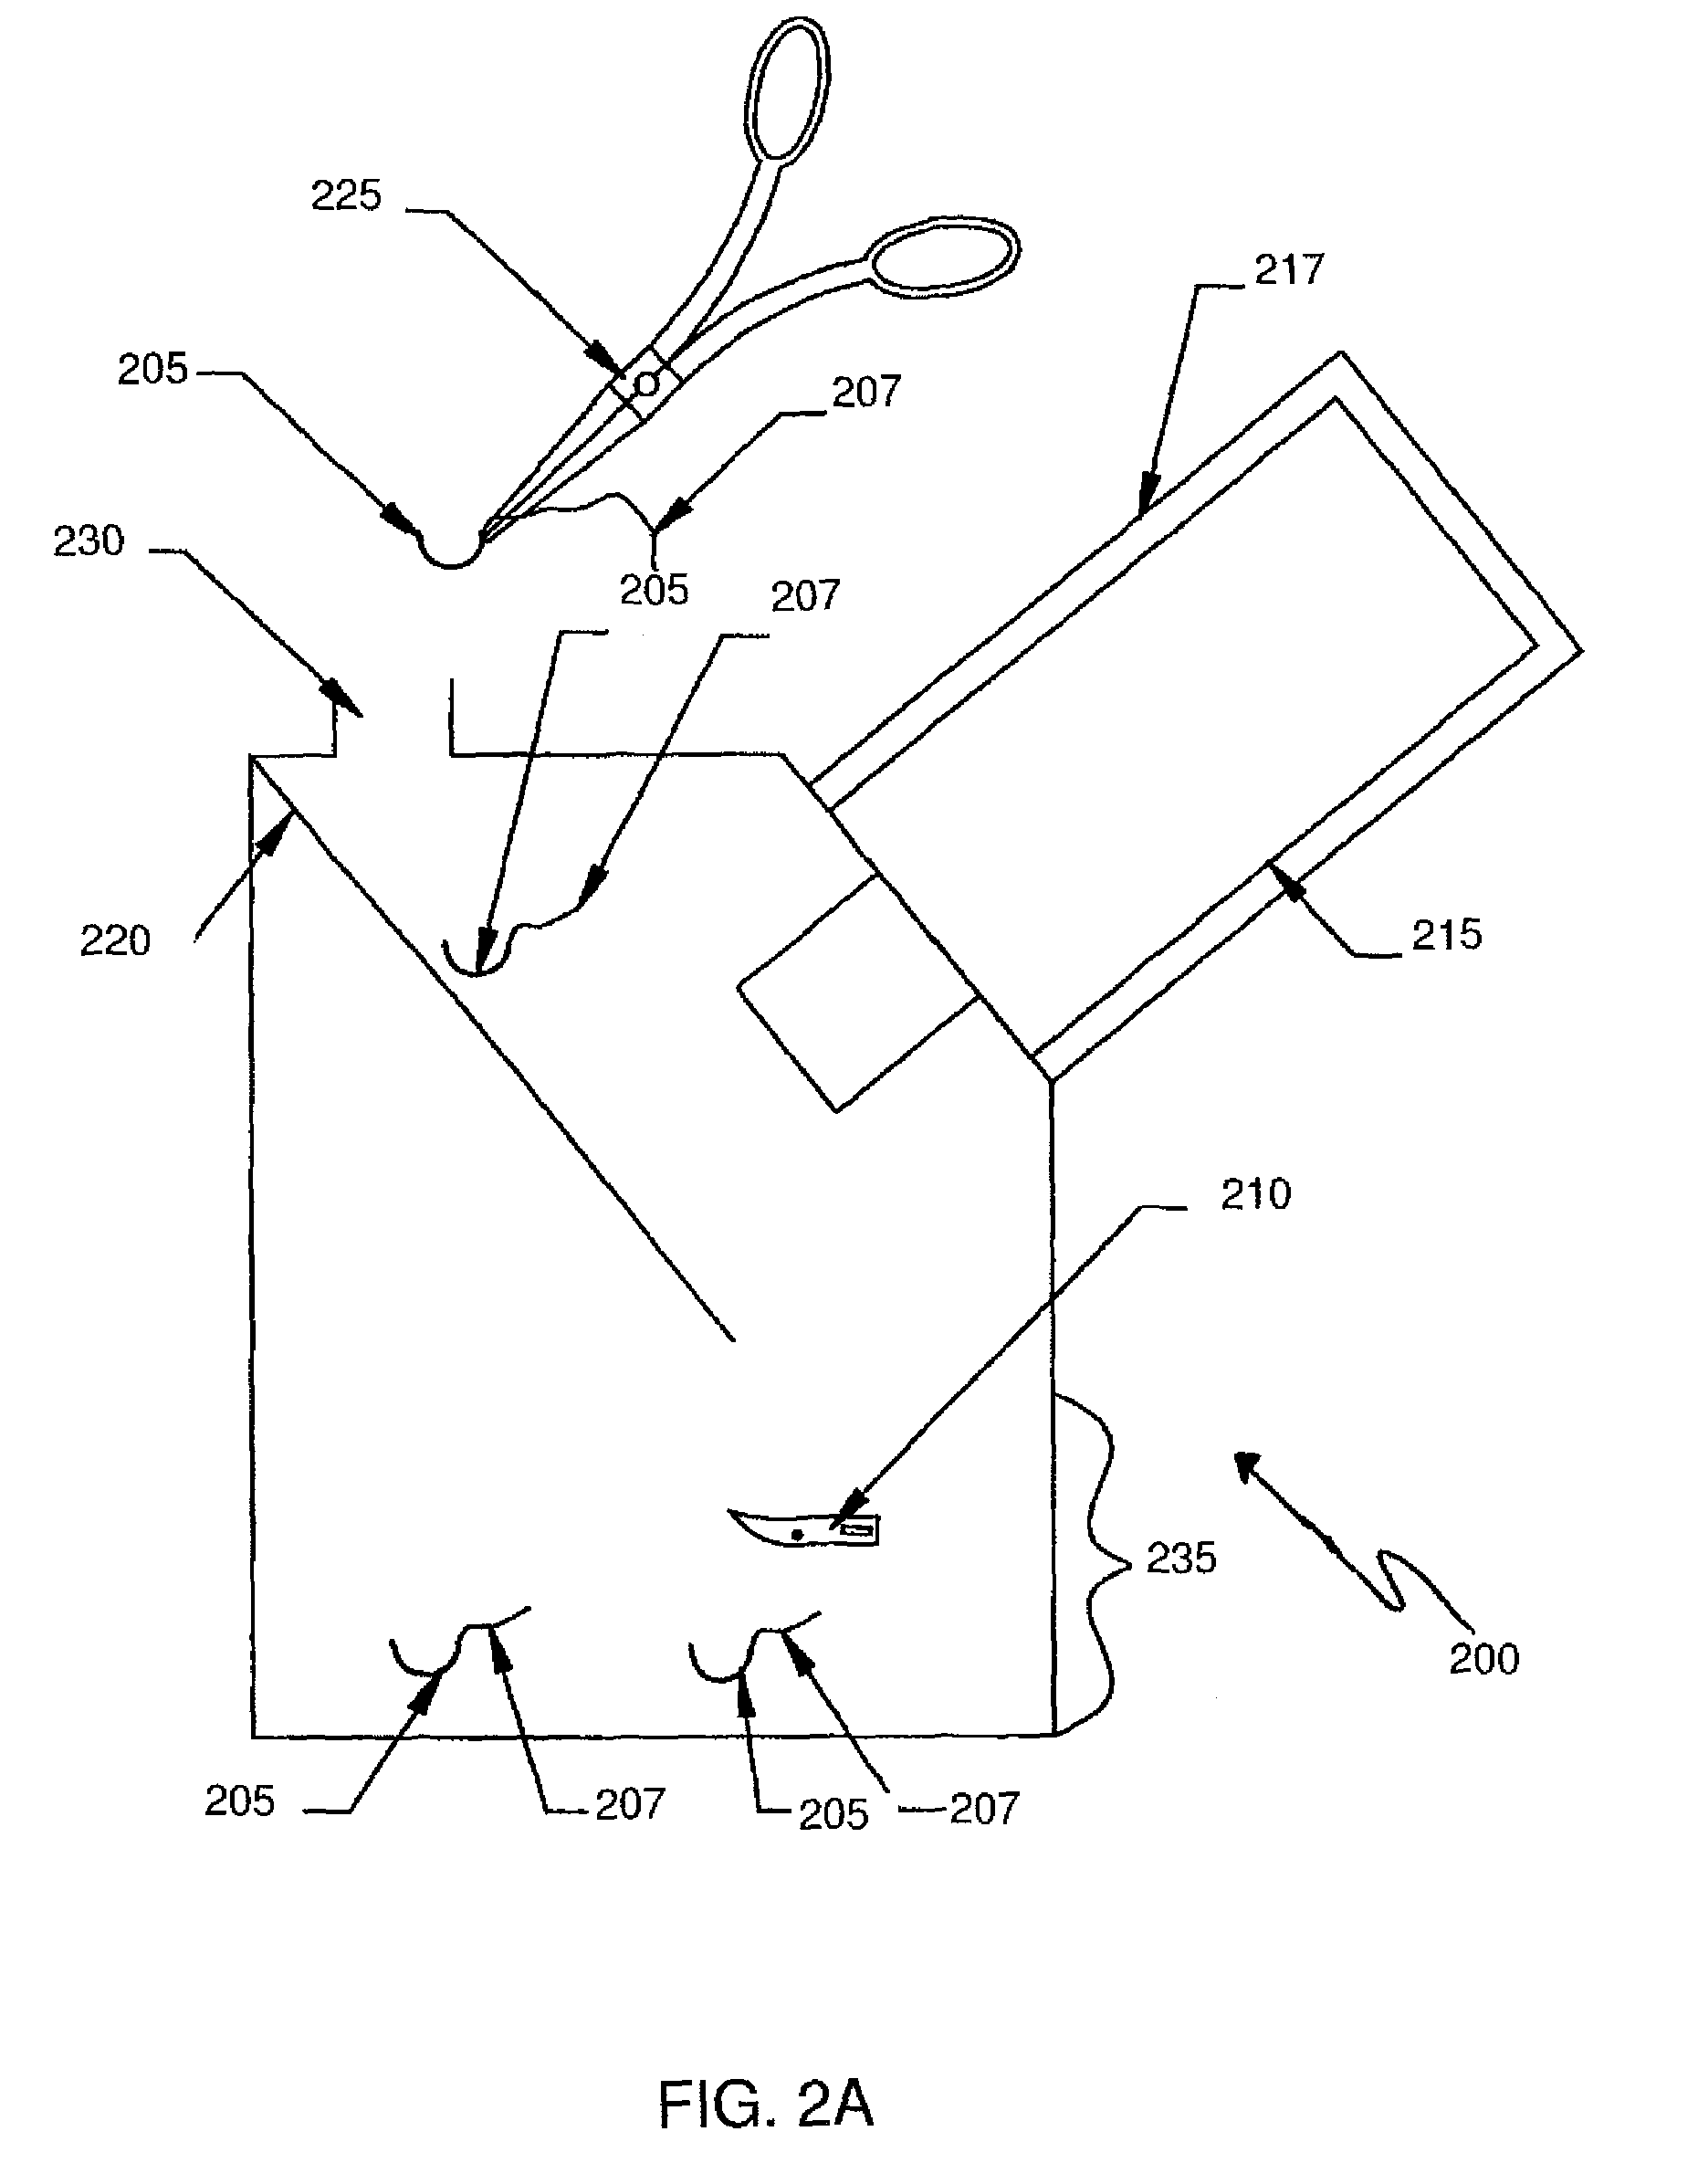 Intra-operative system for identifying and tracking surgical sharp objects, instruments, and sponges